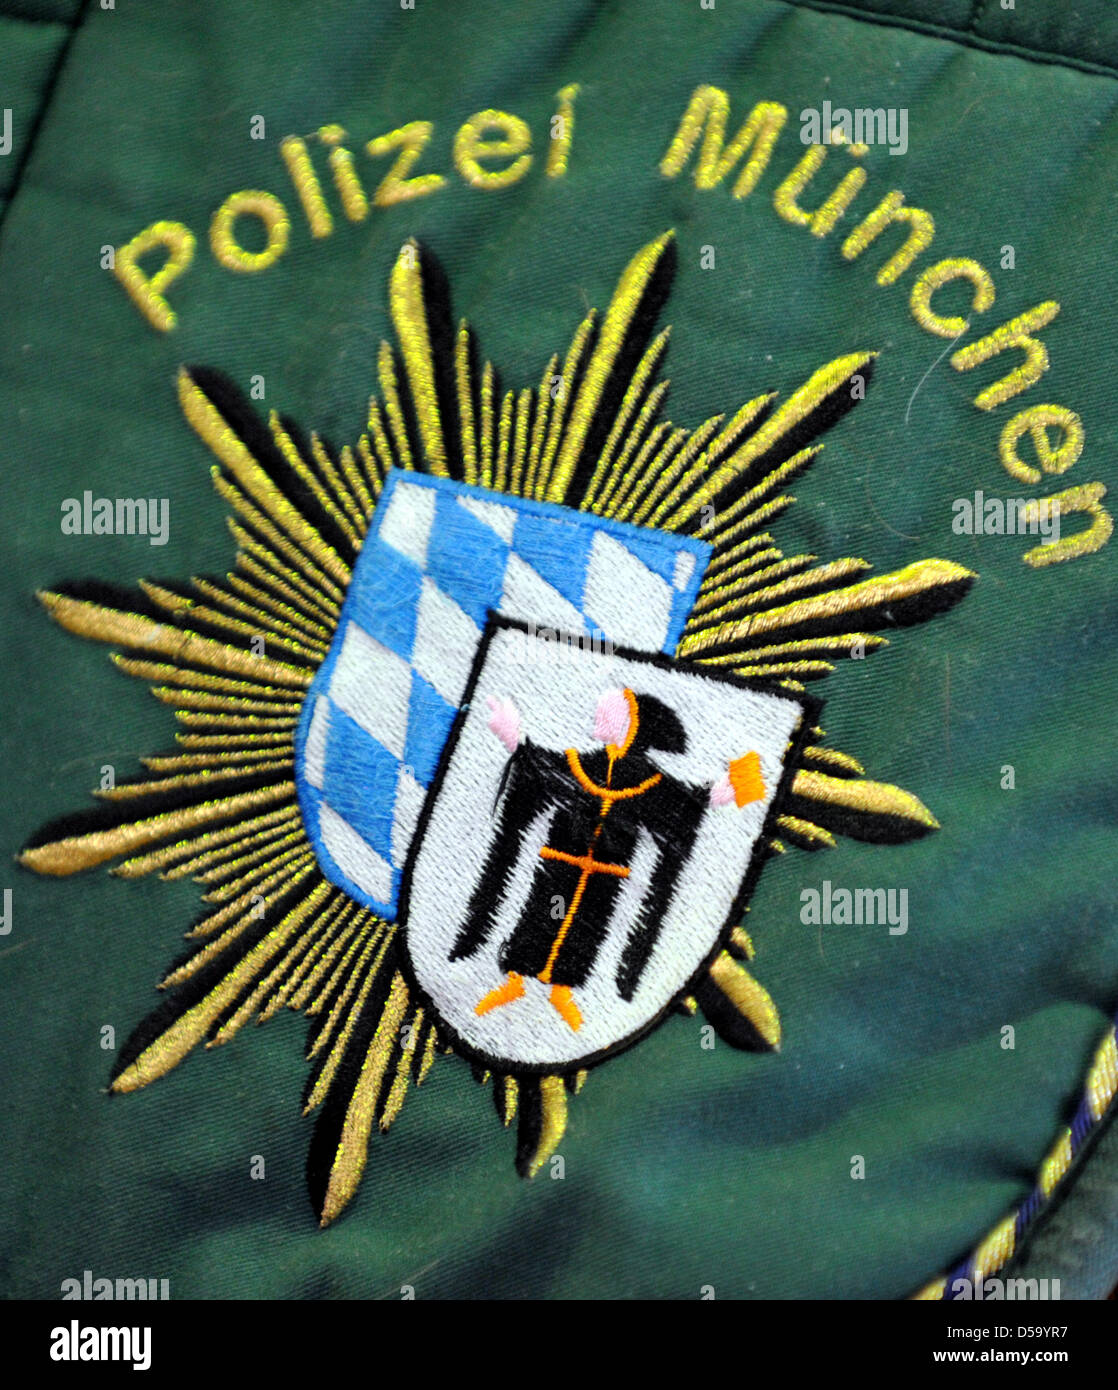 View of the logo of the Munch police on a saddlecloth of the riding team of the Bavarian police in Munich, Germany, 27 March 2013. The horse riding team of the Bavarian police does regular patrol duty as well as special operations like demonstrations and soccer games. Photo: Frank Leonhardt Stock Photo